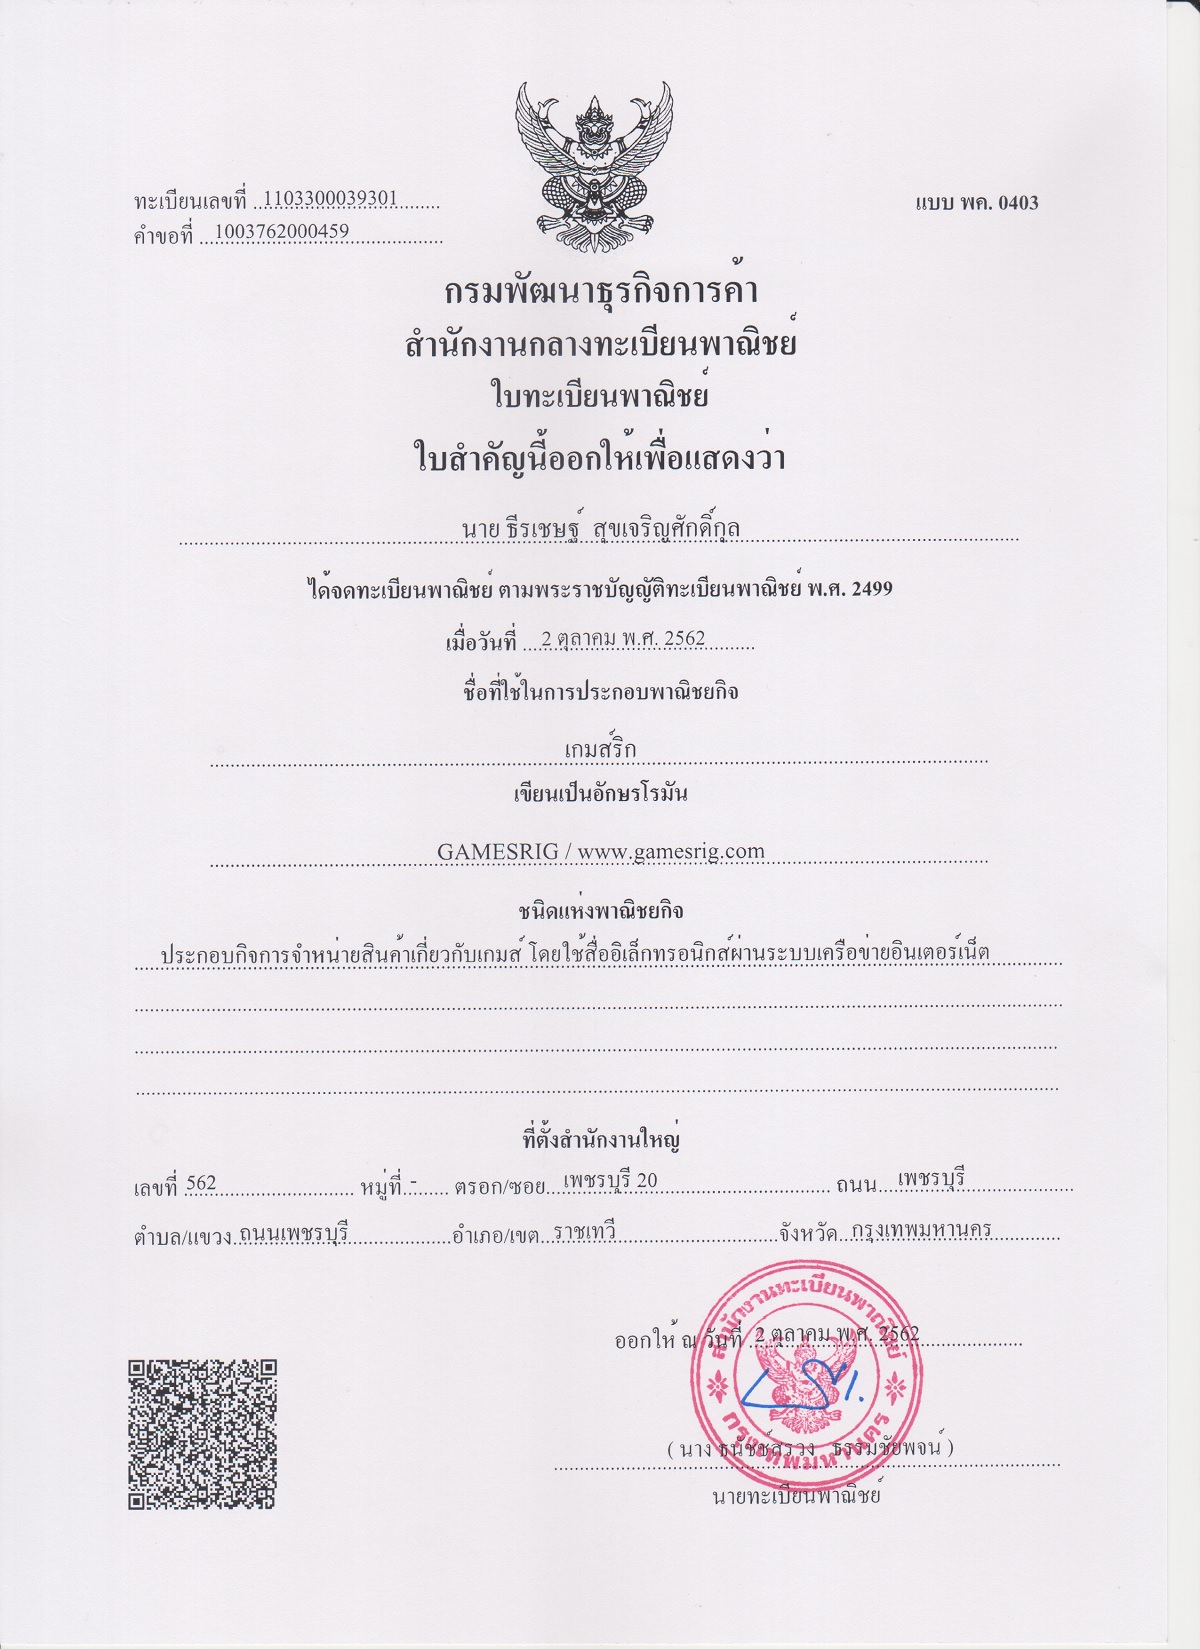 Commerical Registration Certificate